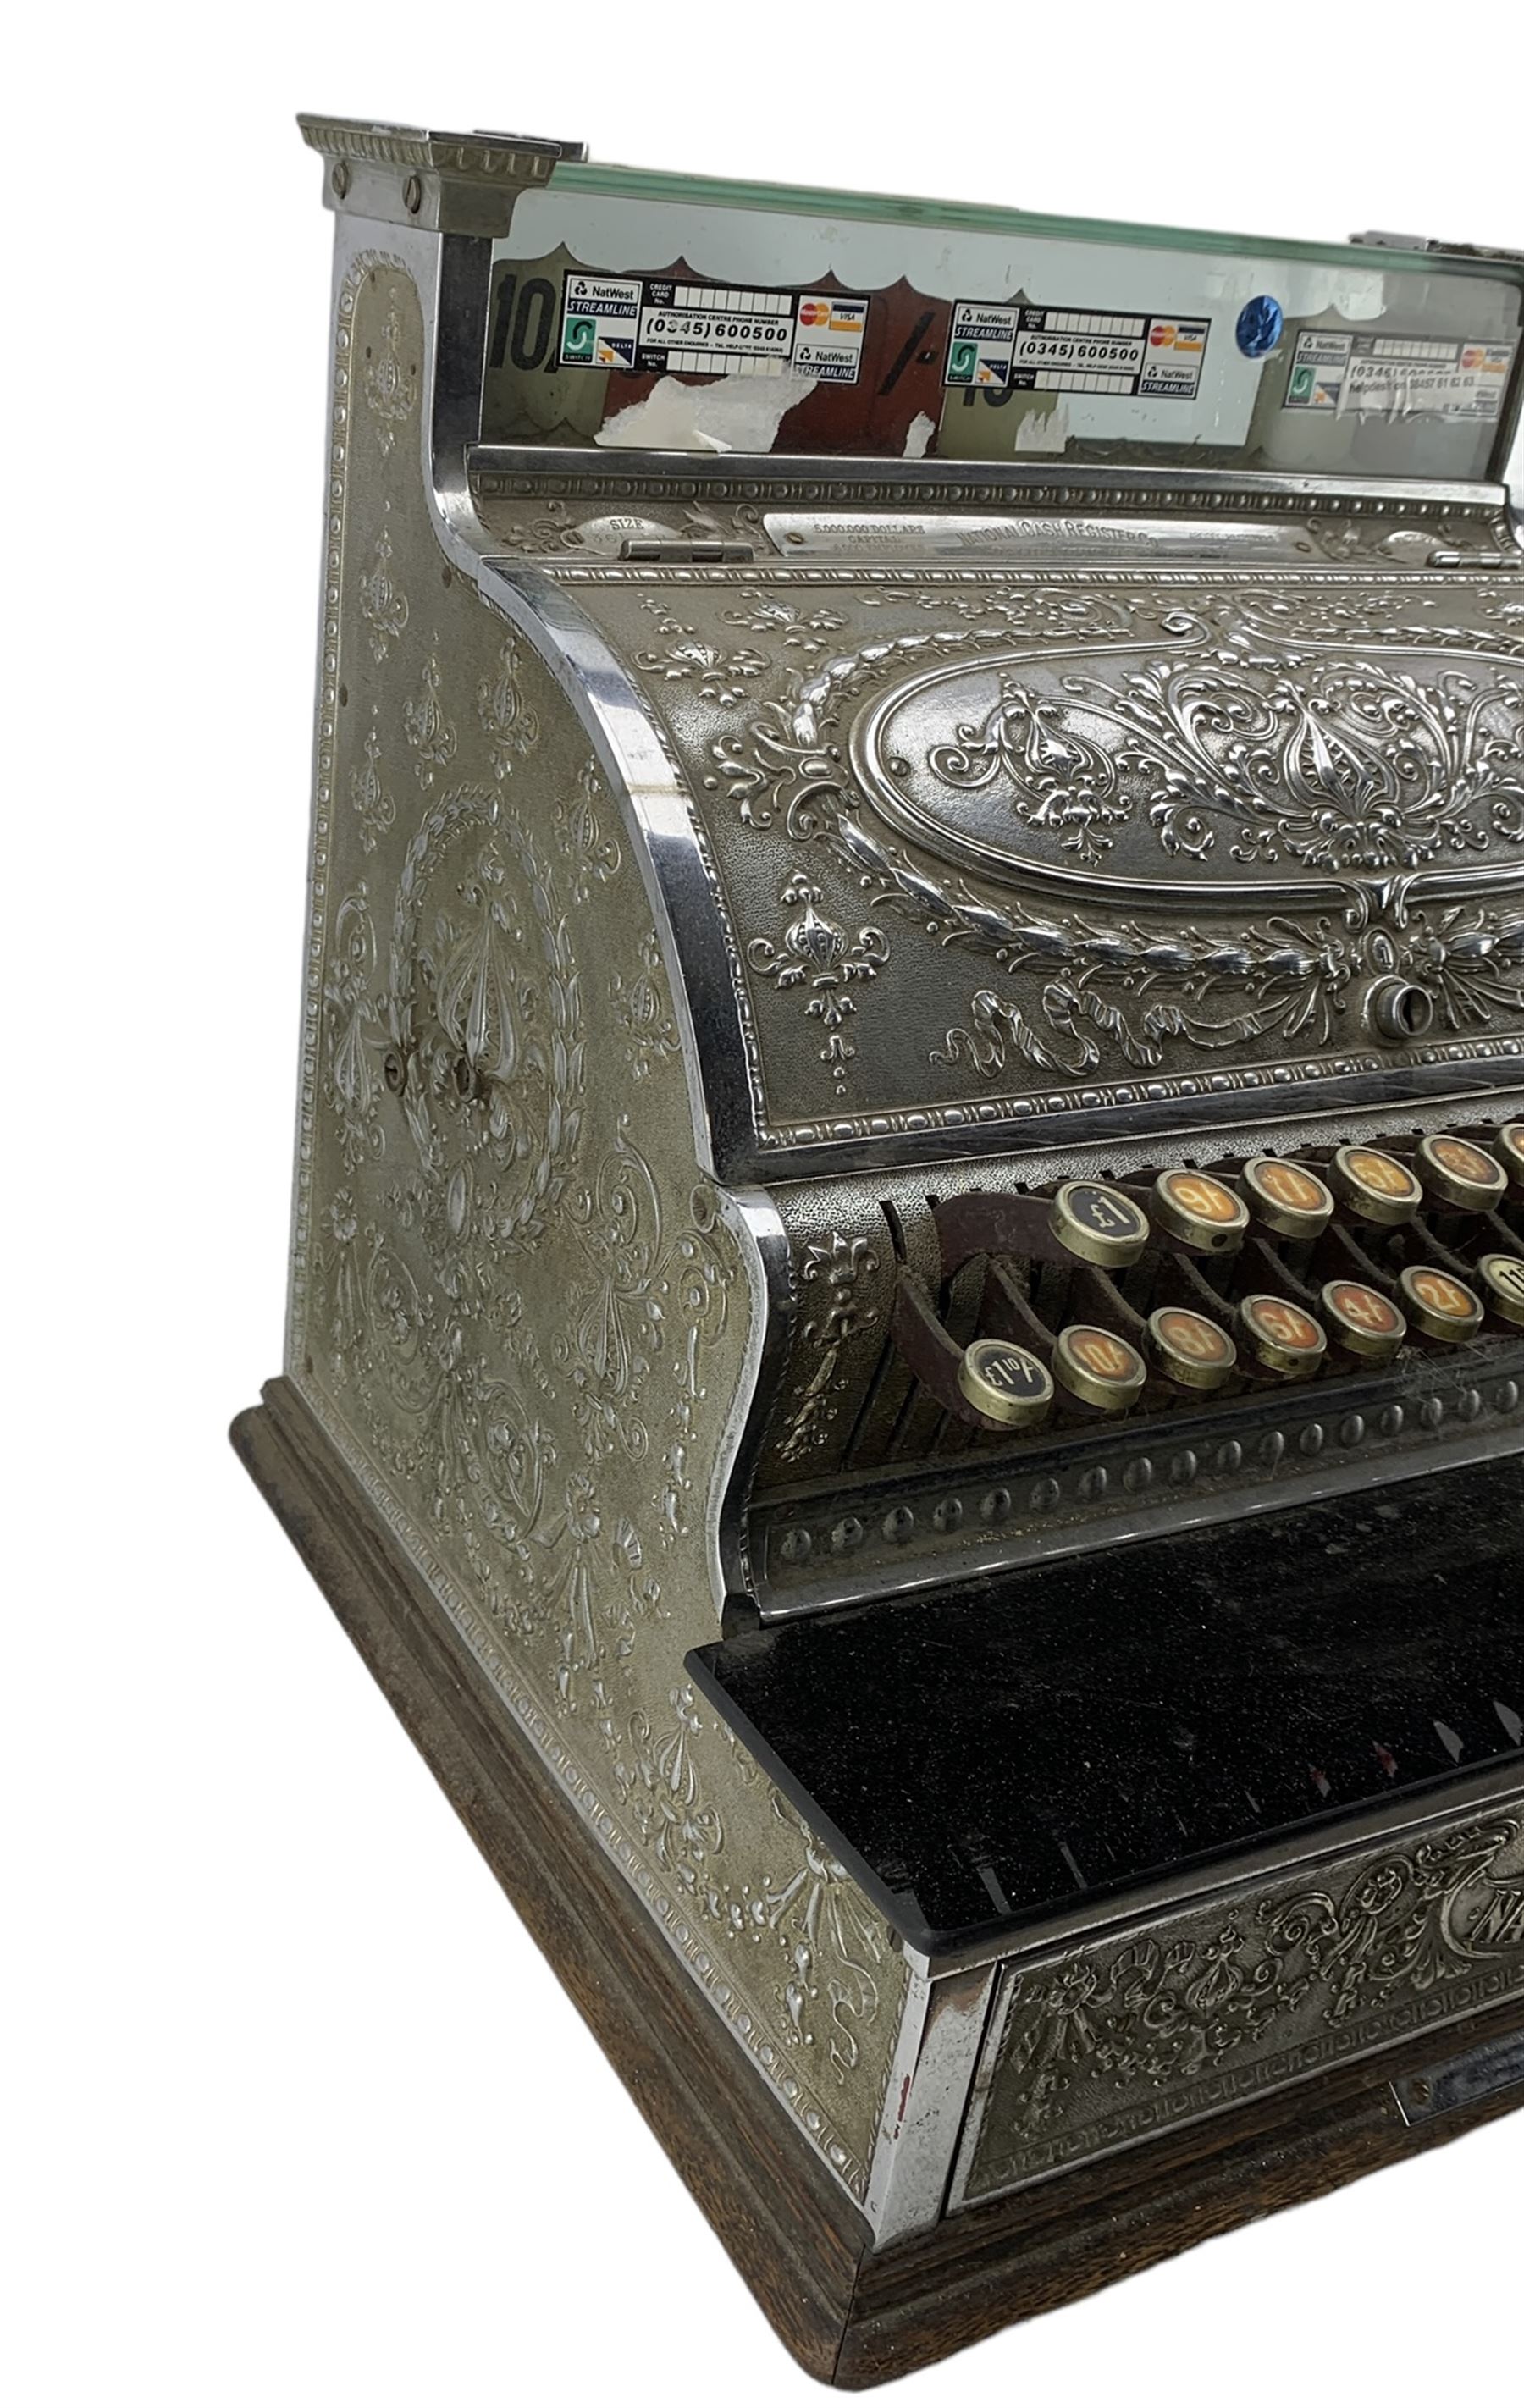 Early 20th century National Cash Register by the National Cash Register Co. - Image 5 of 5